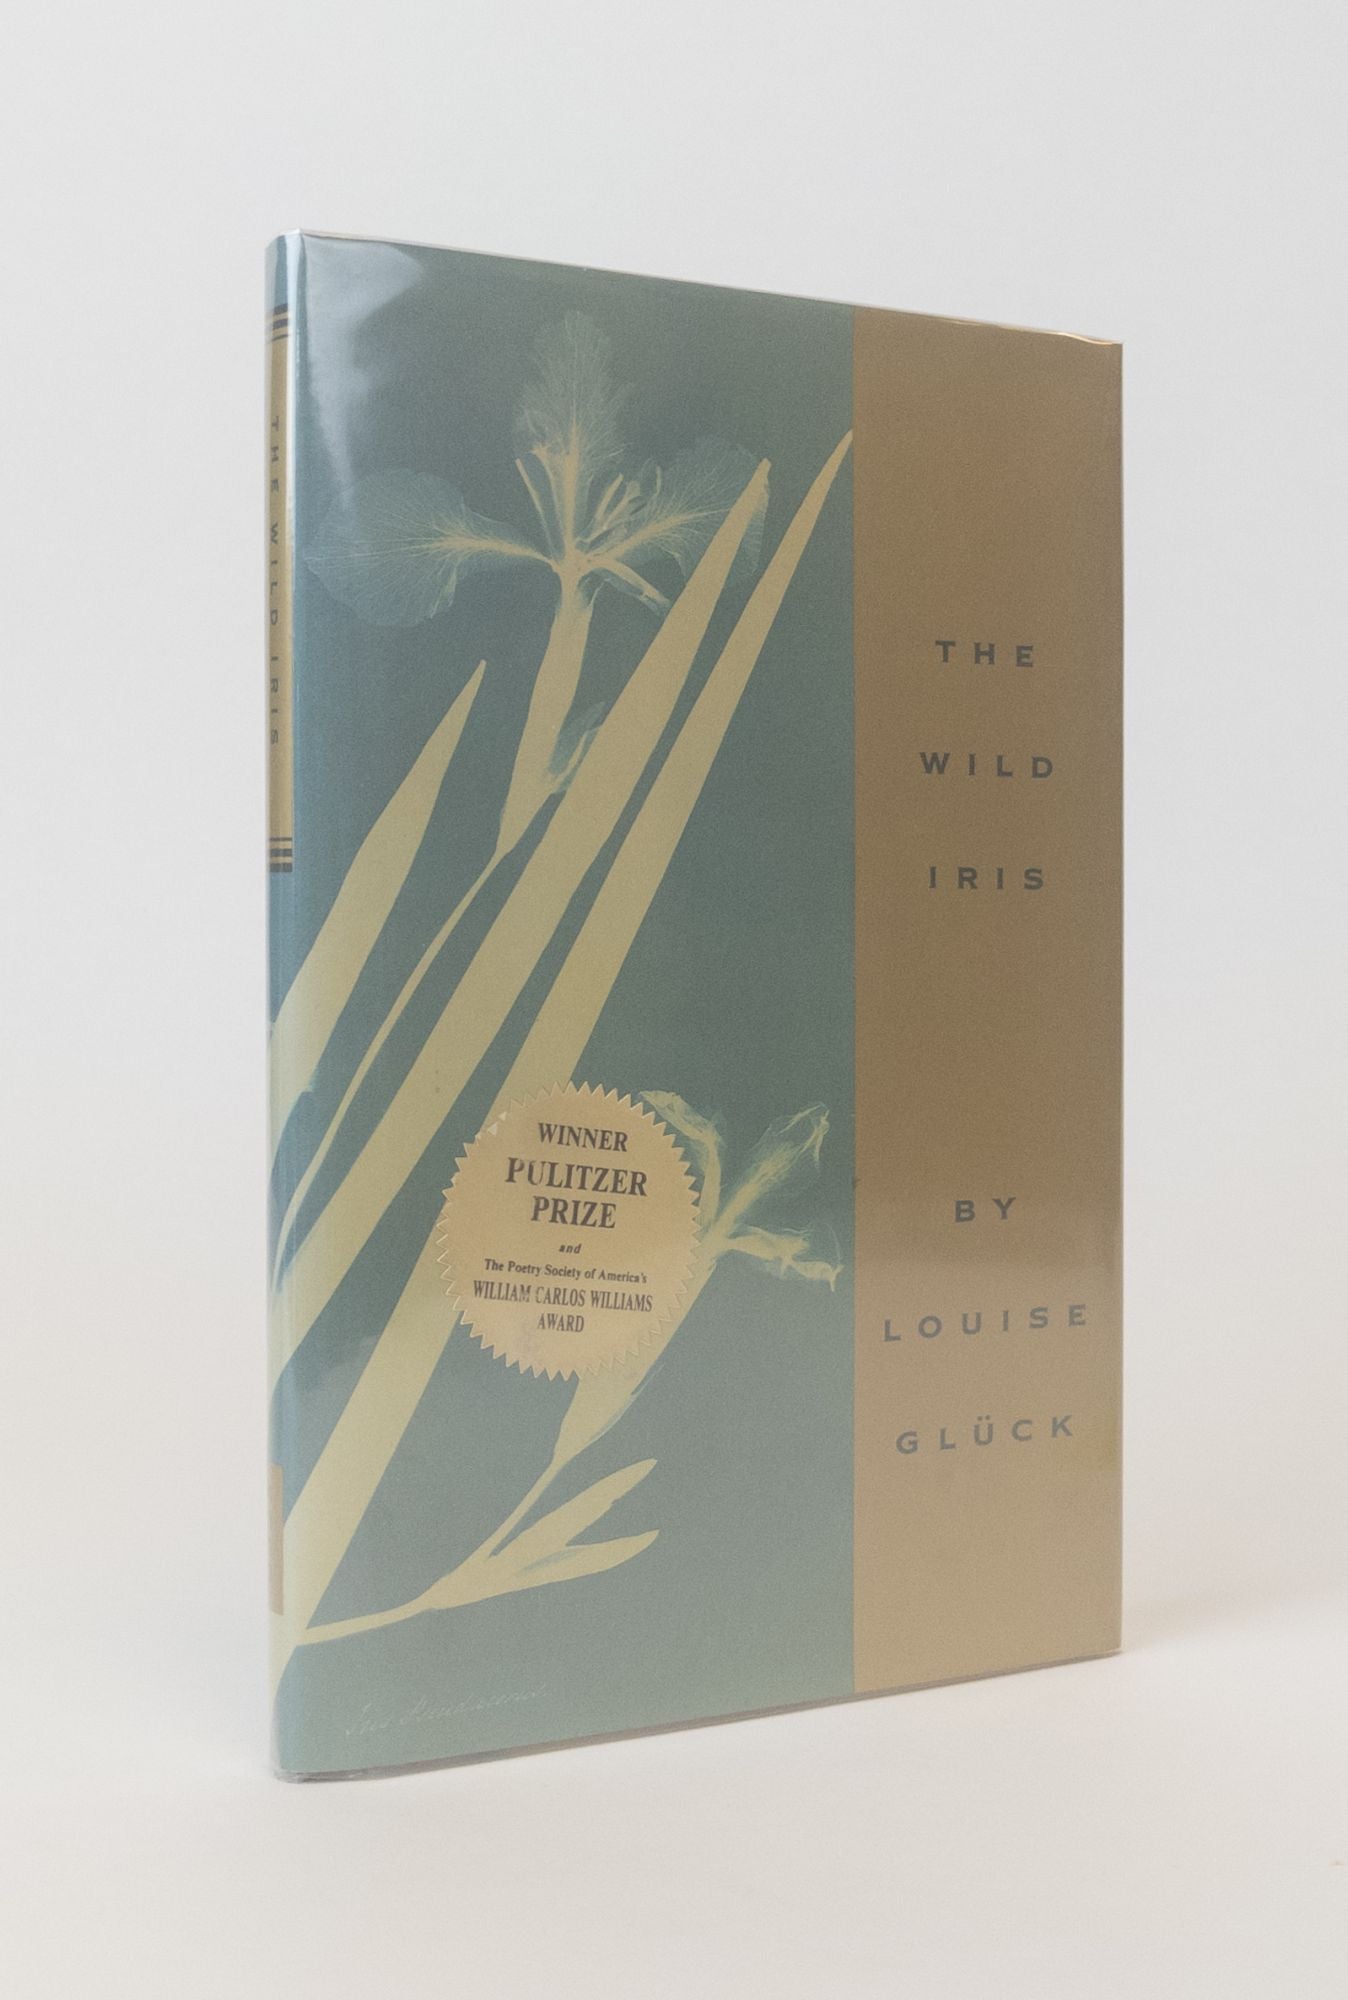 Product Image for THE WILD IRIS [Signed]